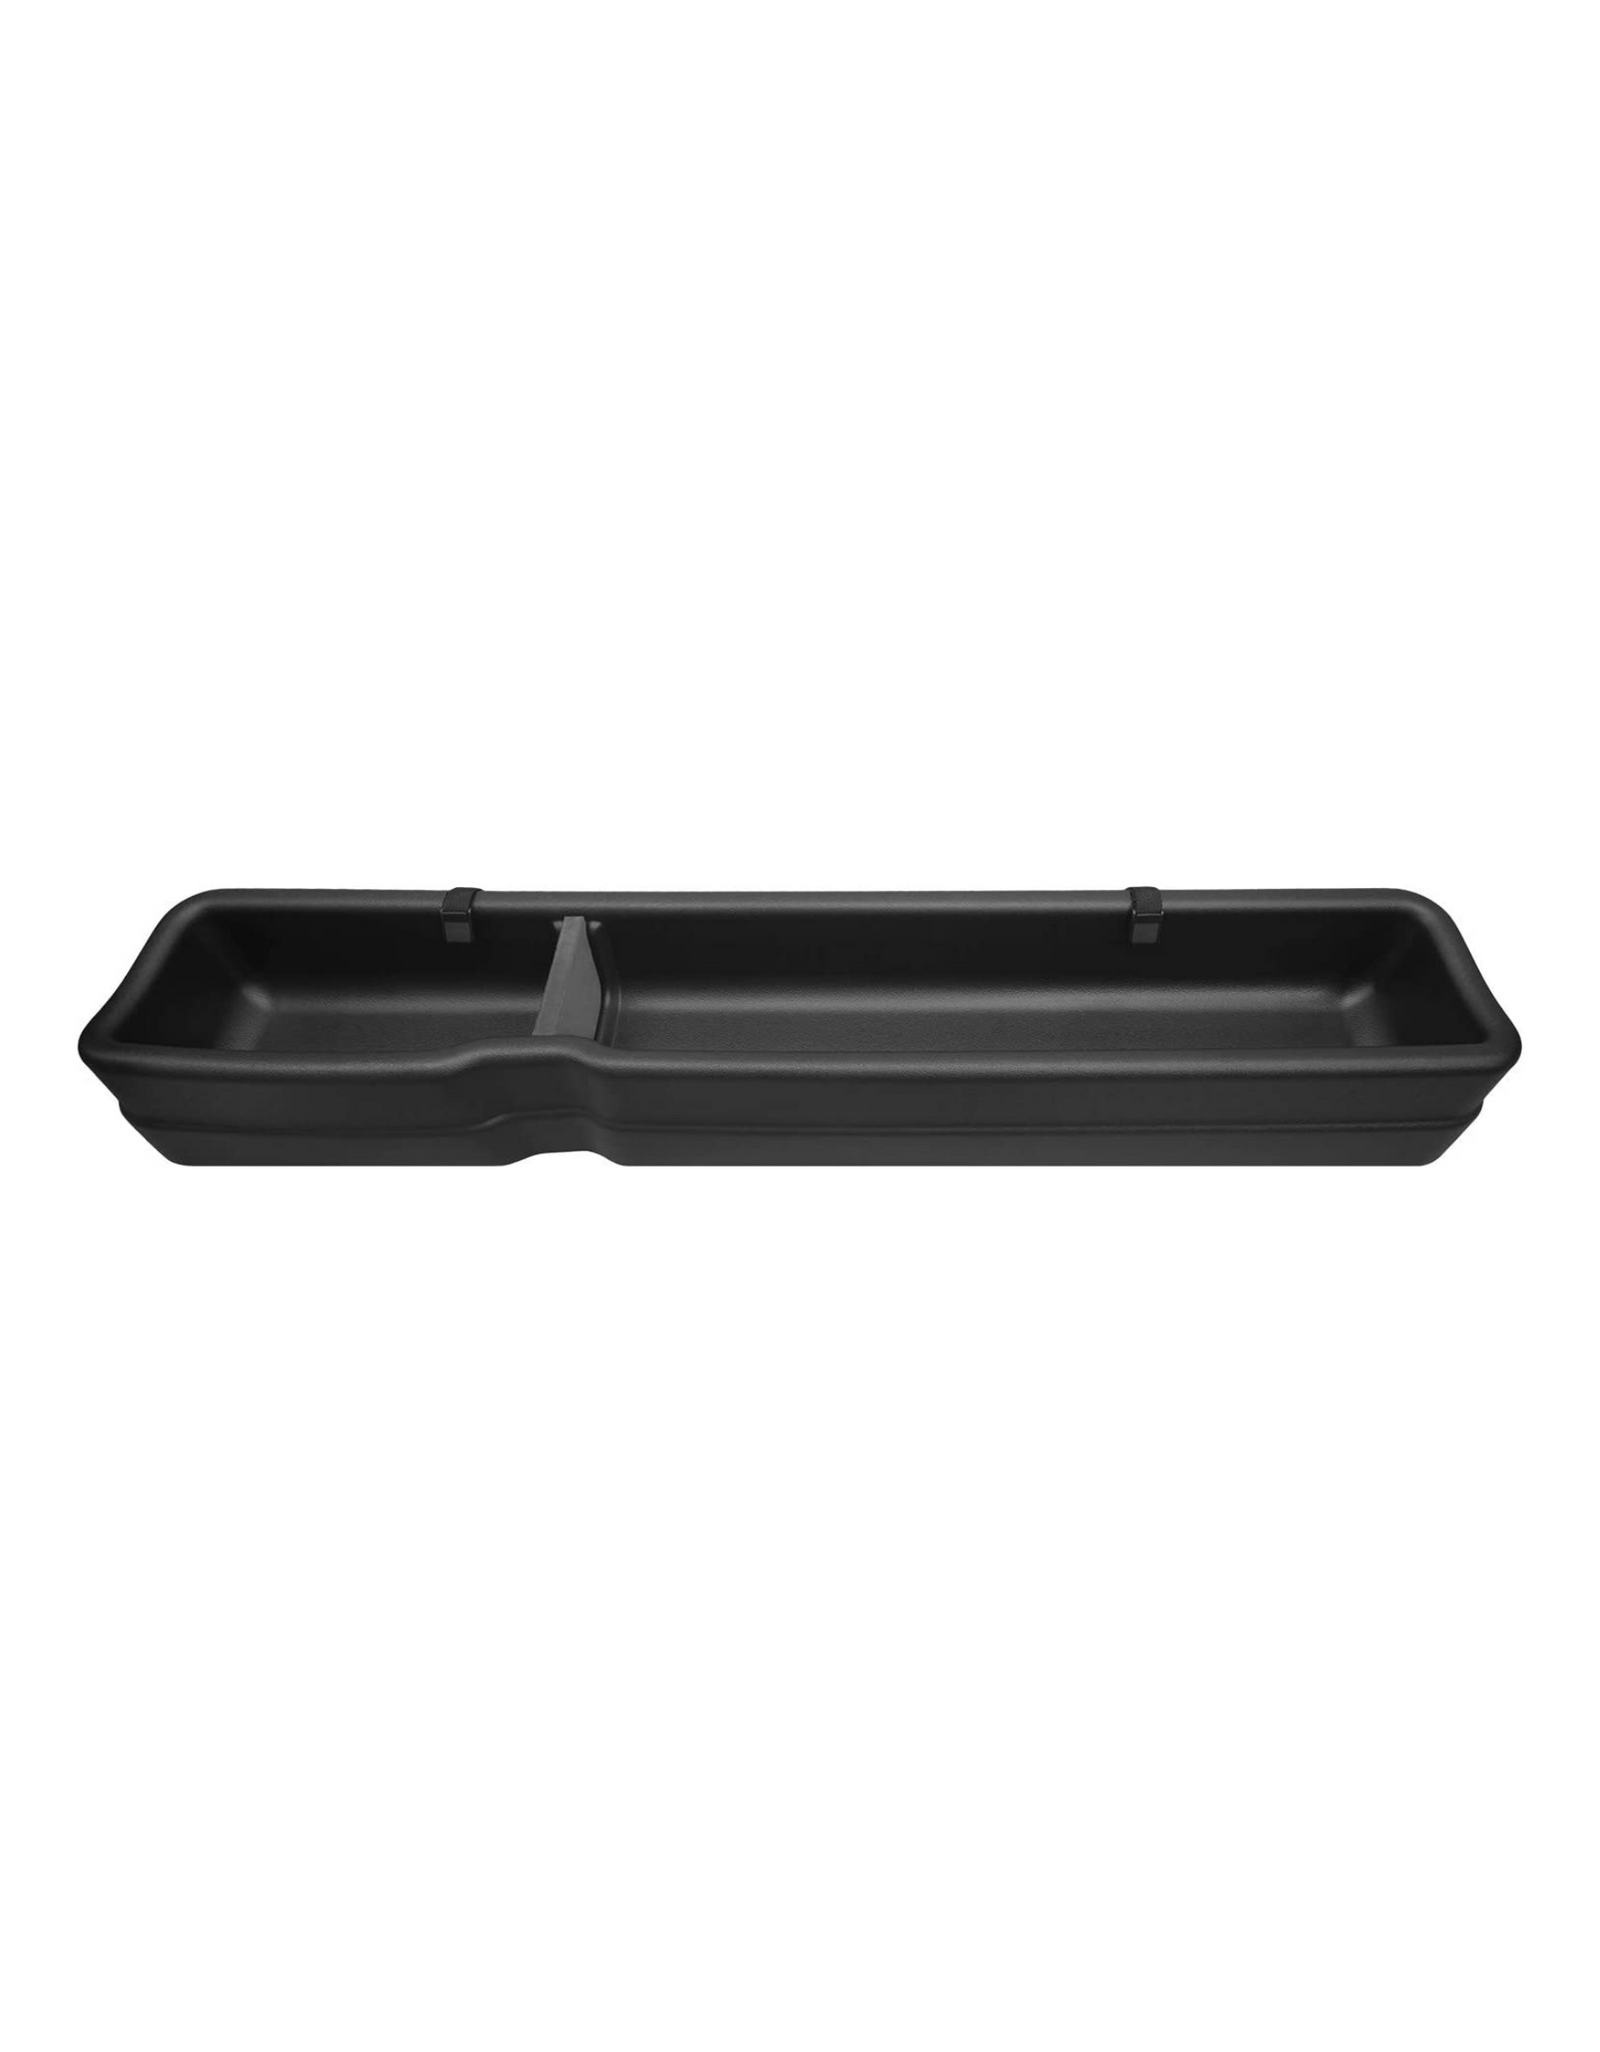 Husky Liners Gearbox Storage Systems (09291) - Fits 2015-2022 Ford F-150, F-250, F-350 SuperCab without Subwoofer Under Rear Seat